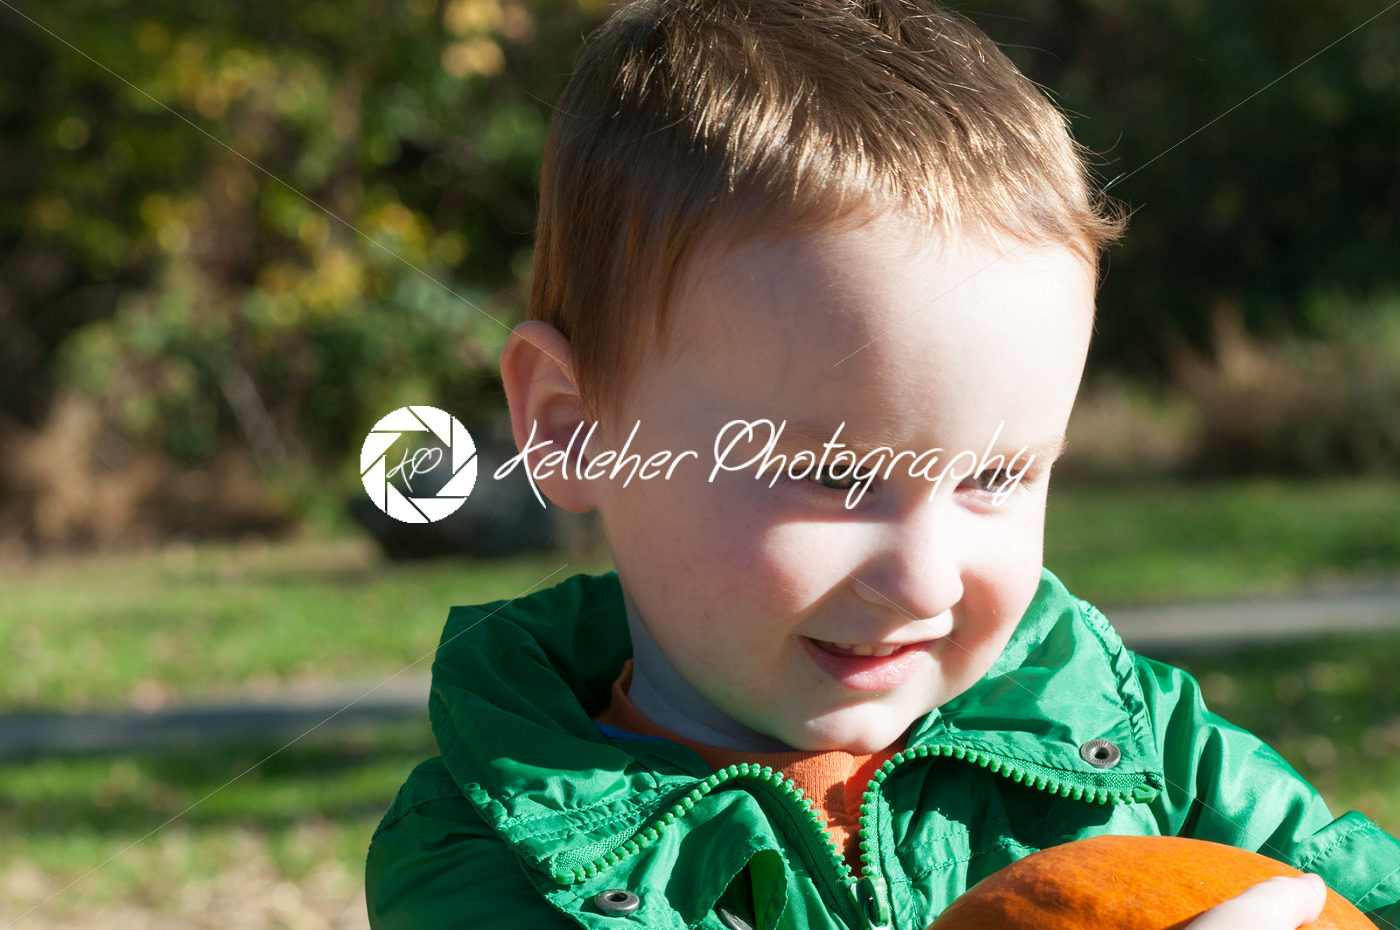 Young toddler boy outside holding a pumpkin with pumpkin fields in the background - Kelleher Photography Store